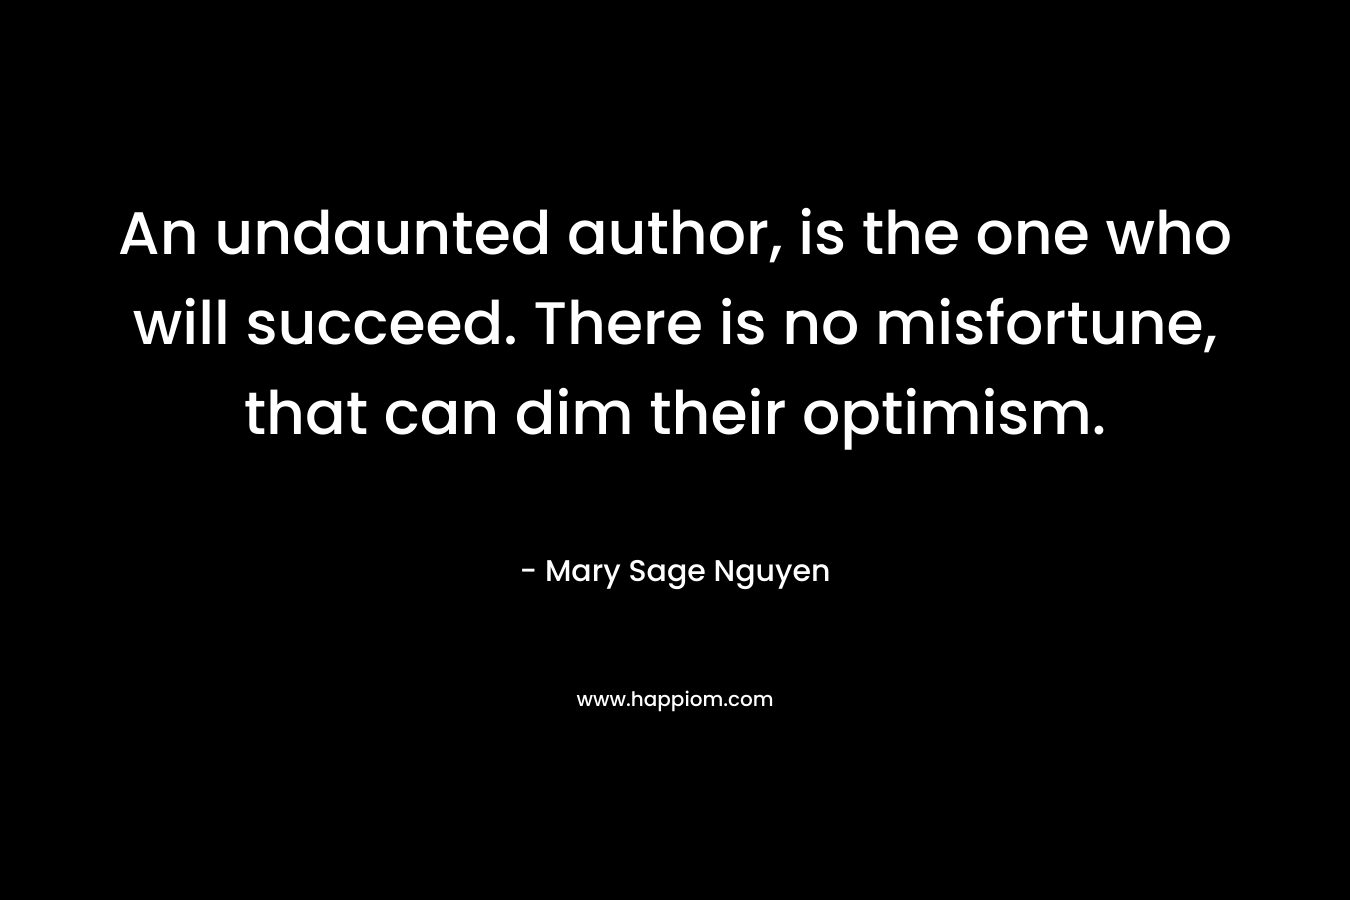 An undaunted author, is the one who will succeed. There is no misfortune, that can dim their optimism. – Mary Sage Nguyen